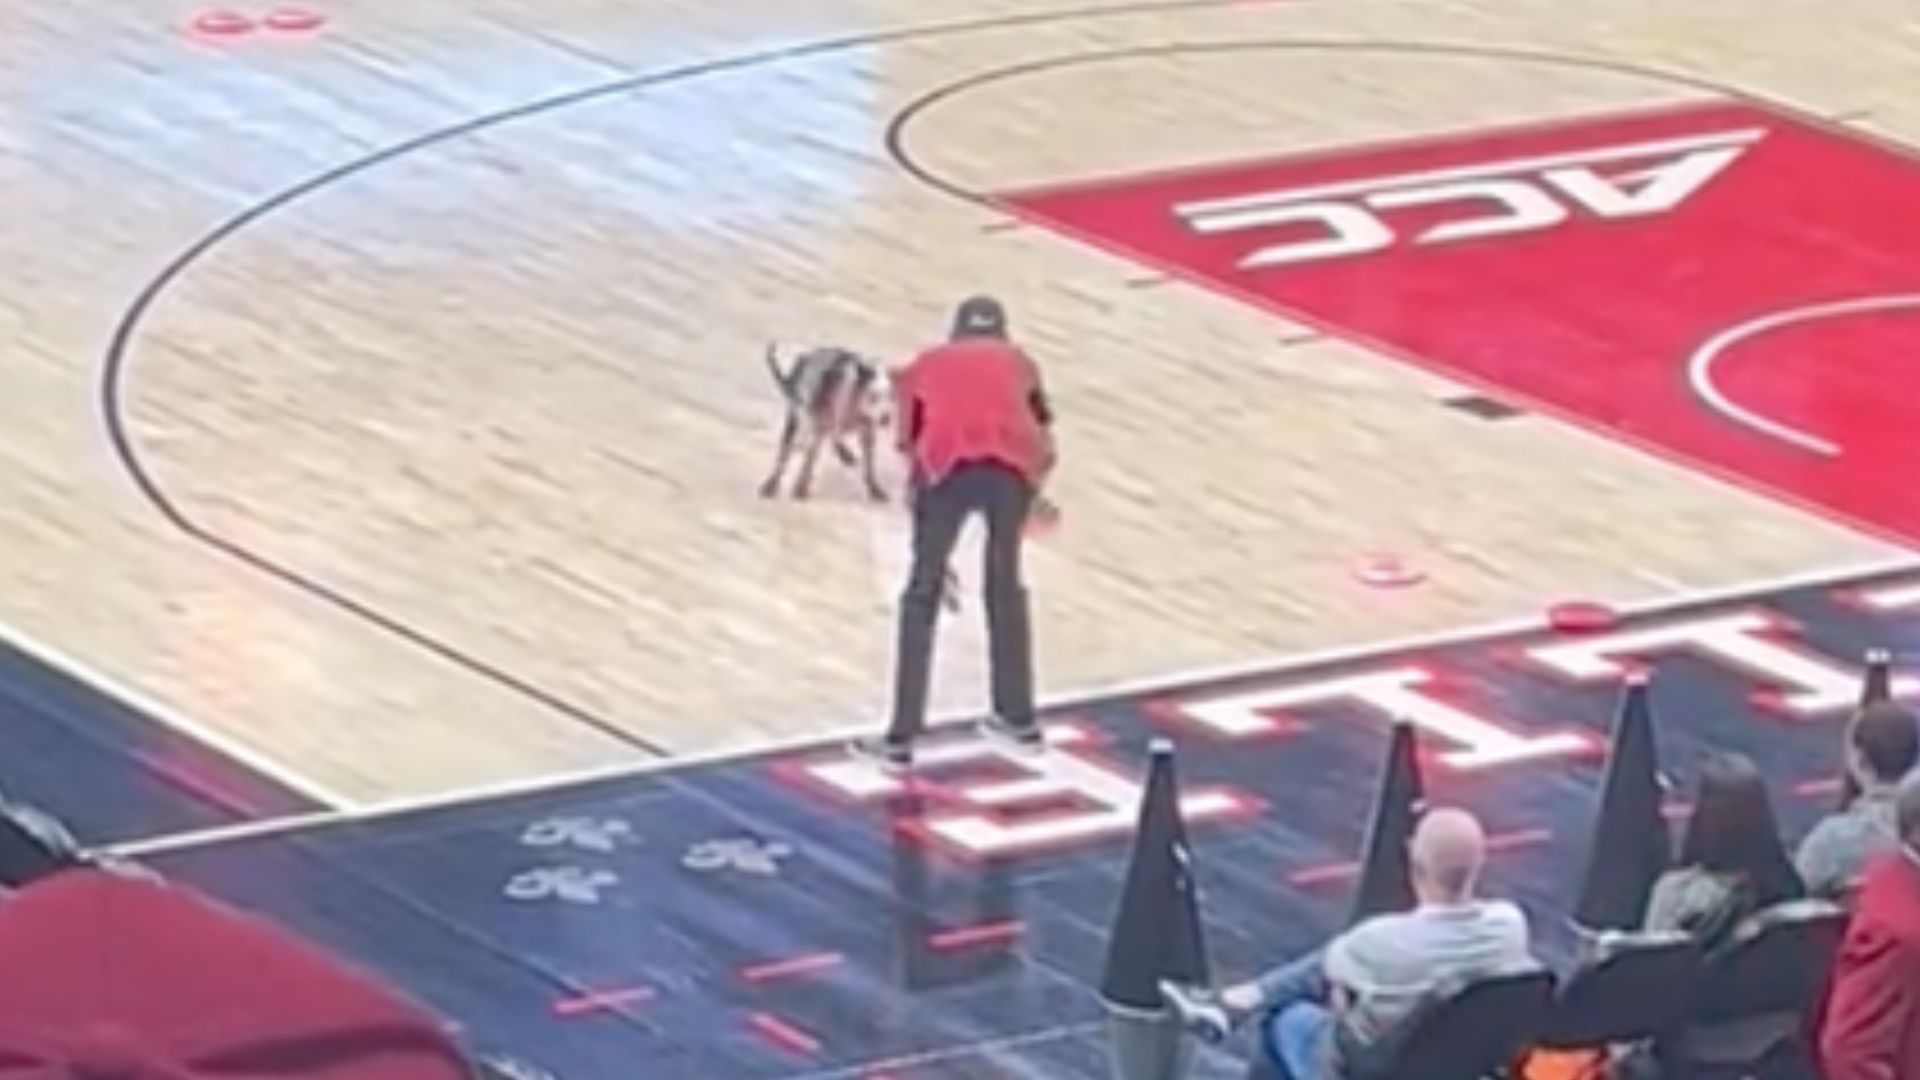 WATCH: Dog poops on court at Louisville basketball halftime show